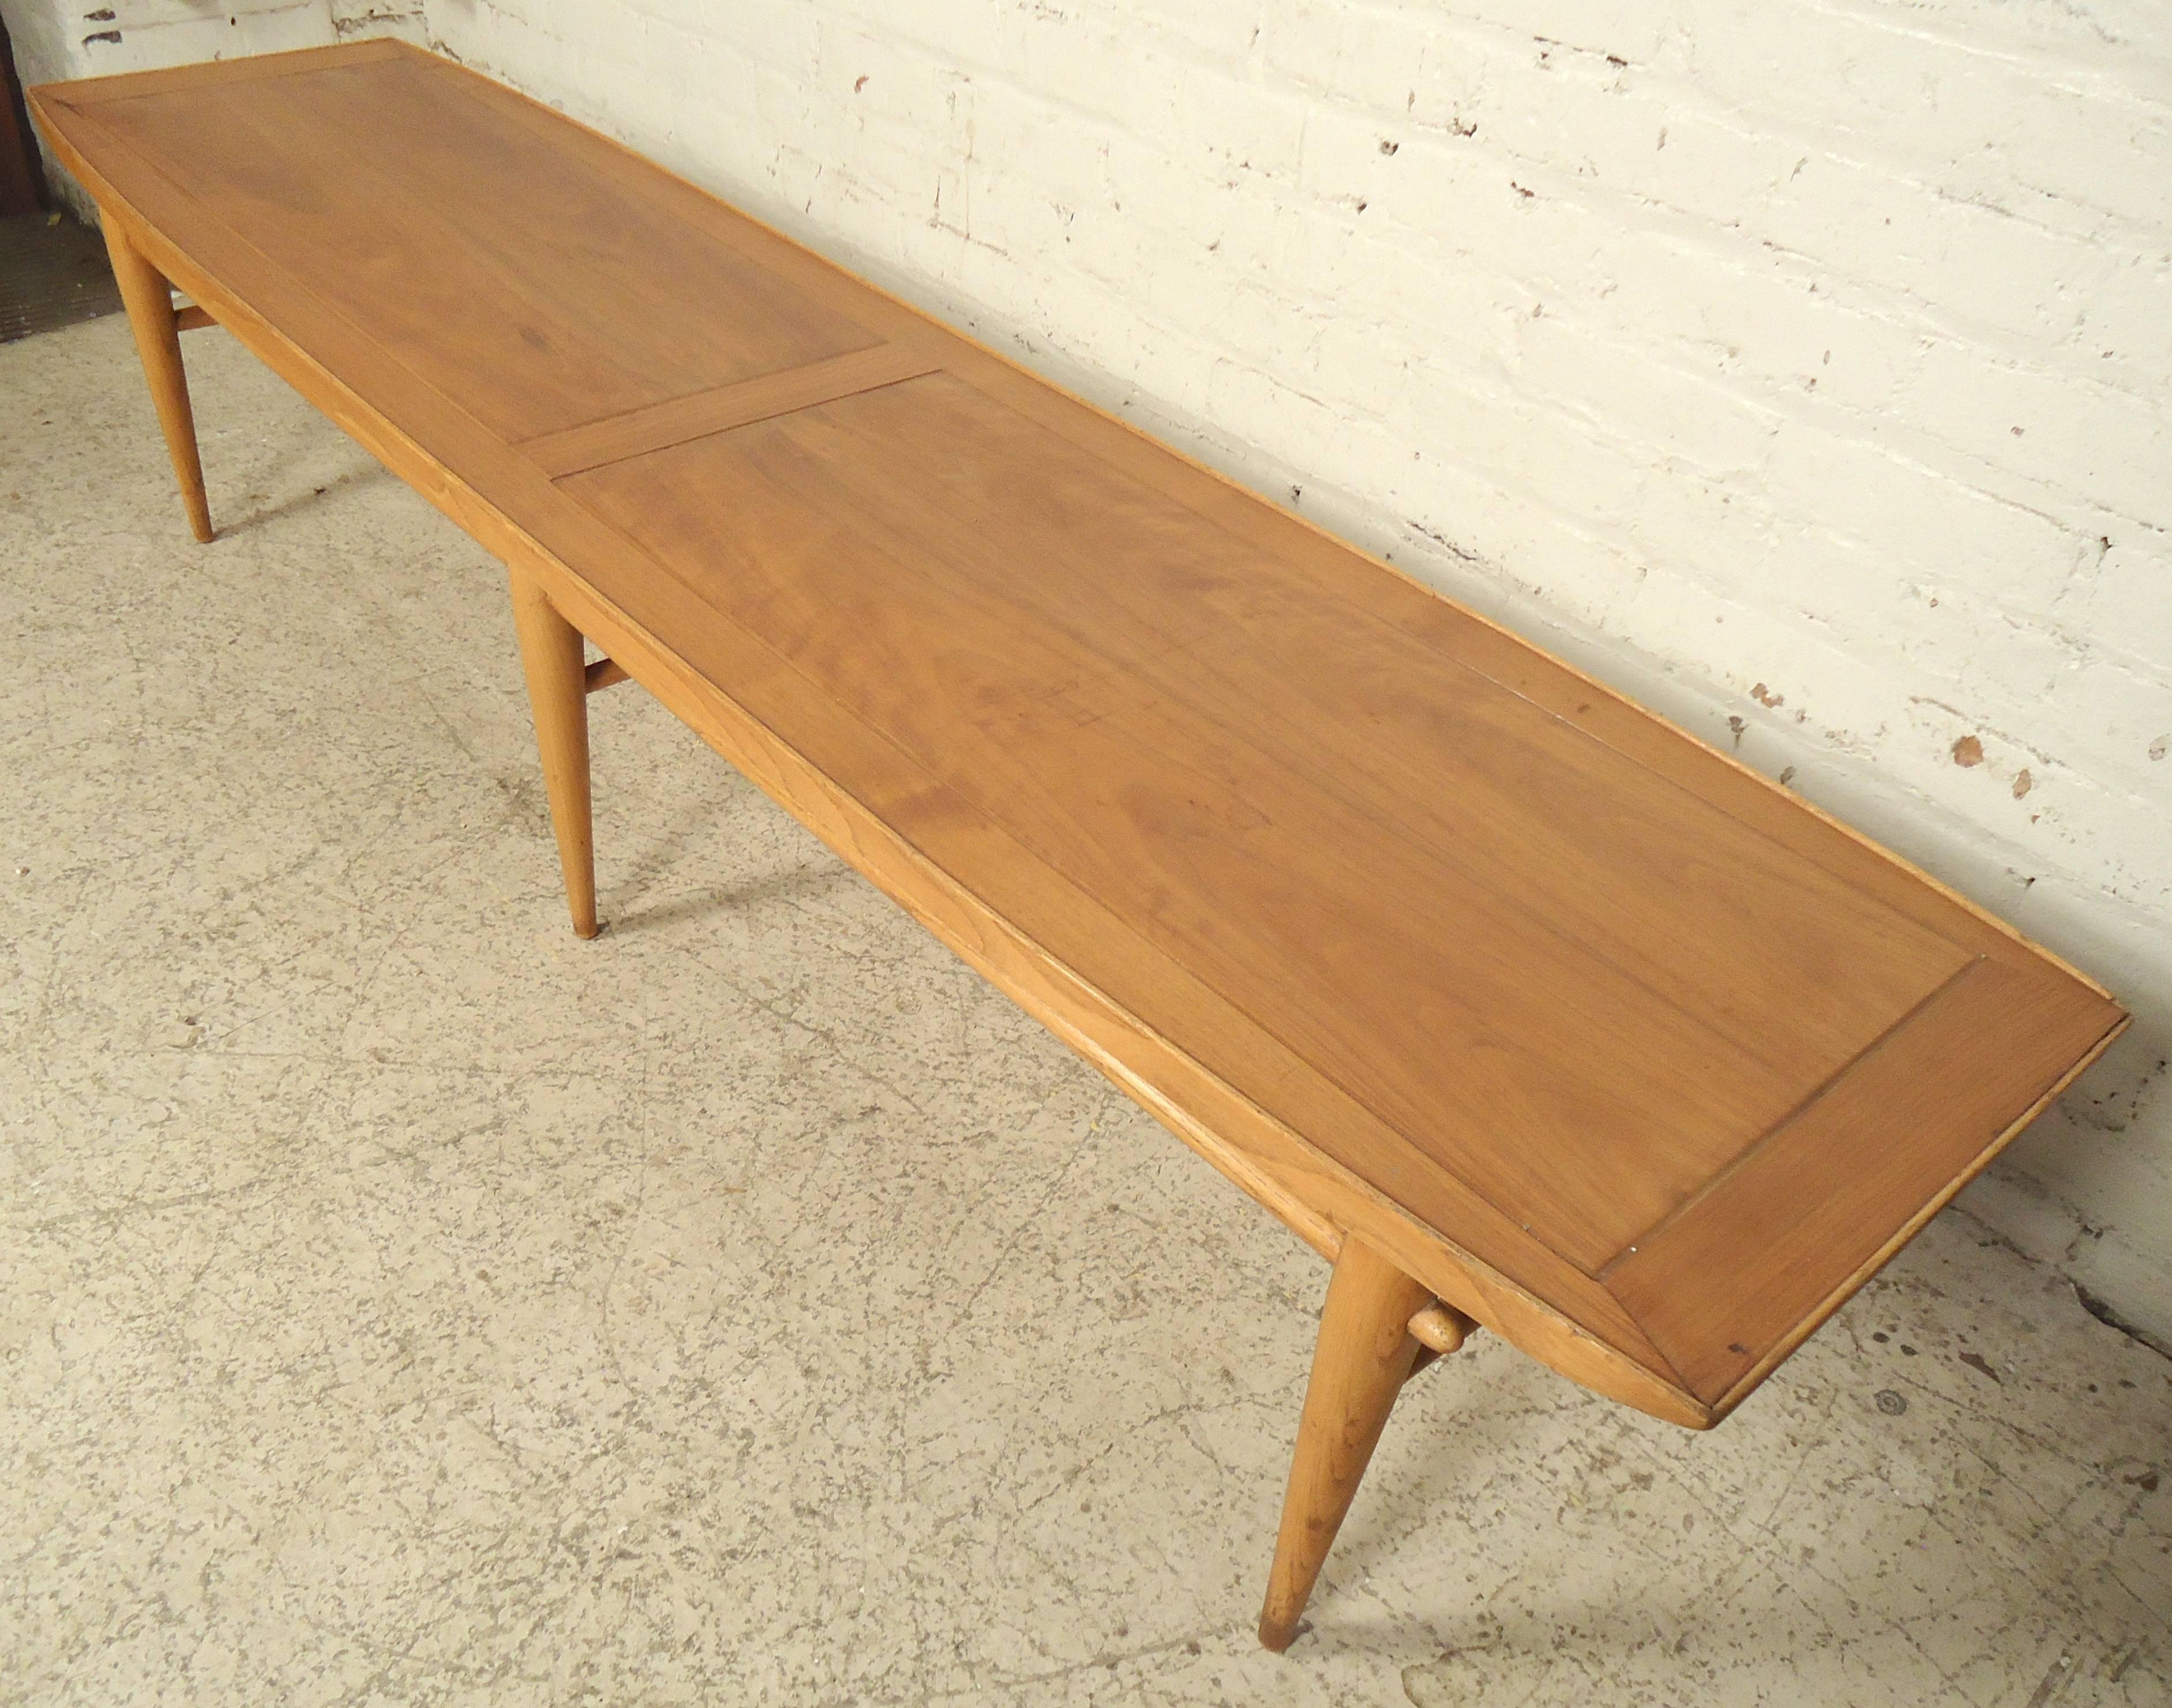 Mid-Century Modern coffee table by Lane with extra-long top and tapered legs. Nice trim around the top and wood stretchers. 

(Please confirm item location - NY or NJ with dealer).
 